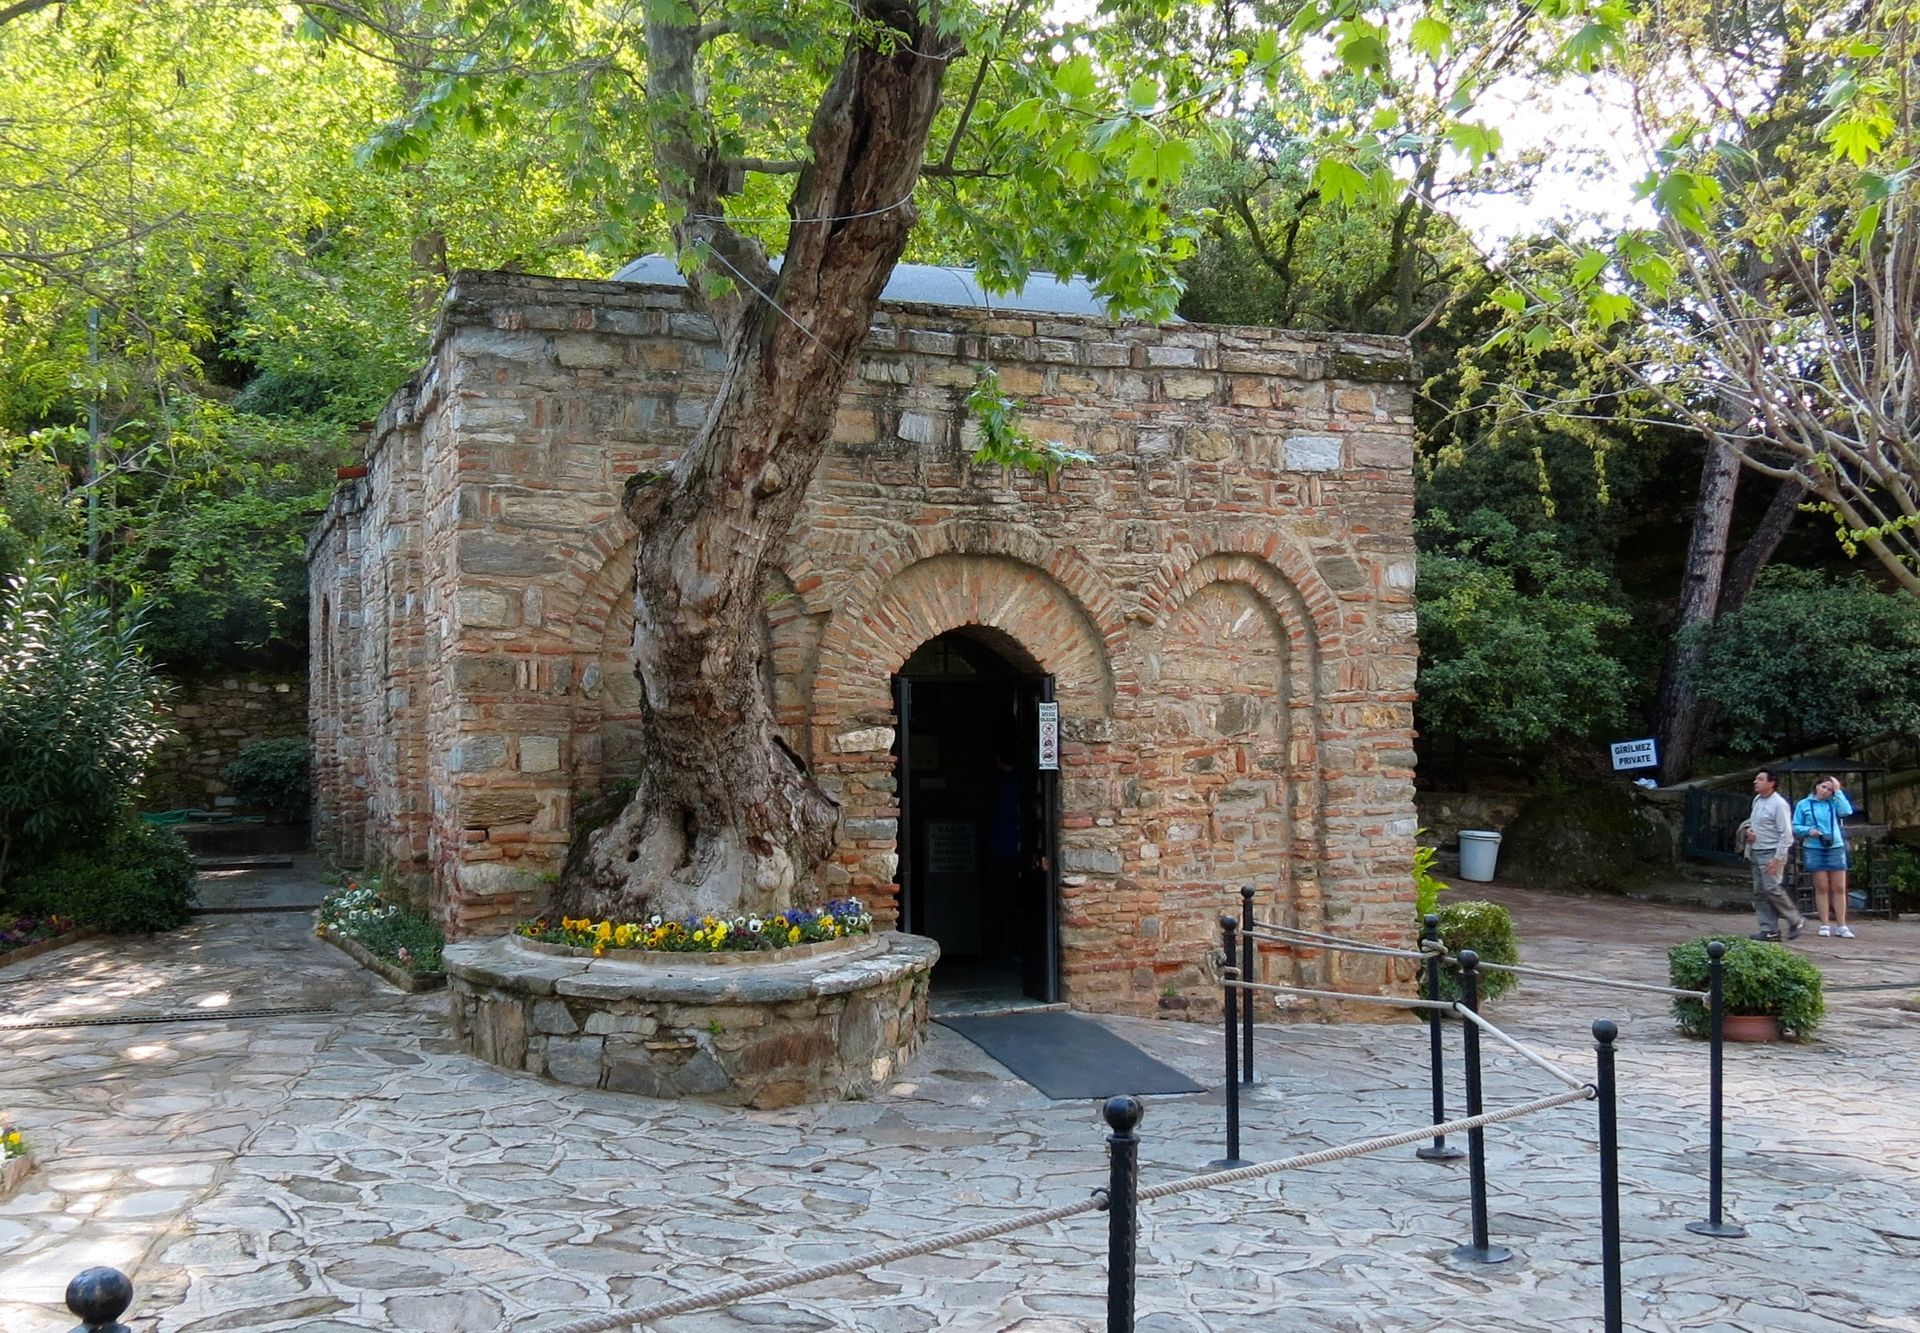 A stone building with a tree in front of it.